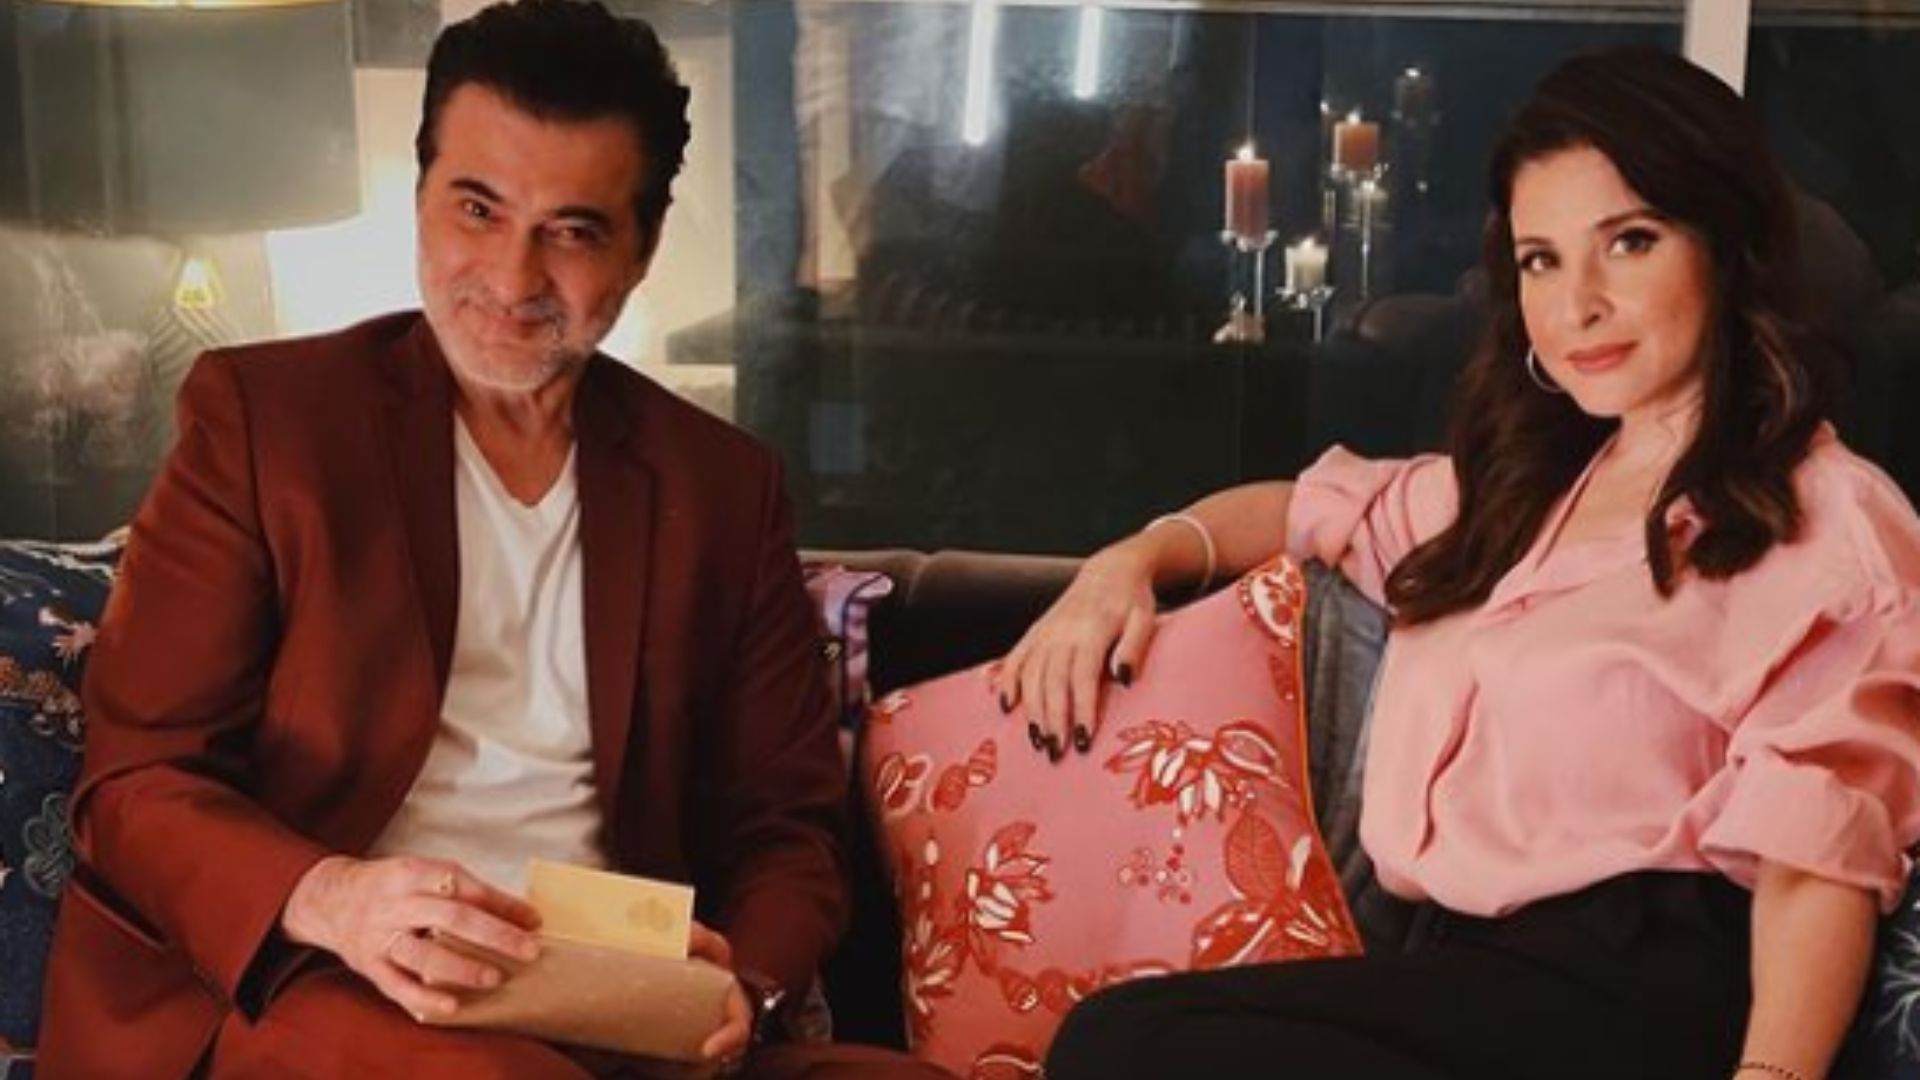 Maheep Kapoor Reveals She Forgave Sanjay Kapoor For Cheating On Her, Says Marriage Is Lifelong. We Object, Cheating Is Unpardonable!